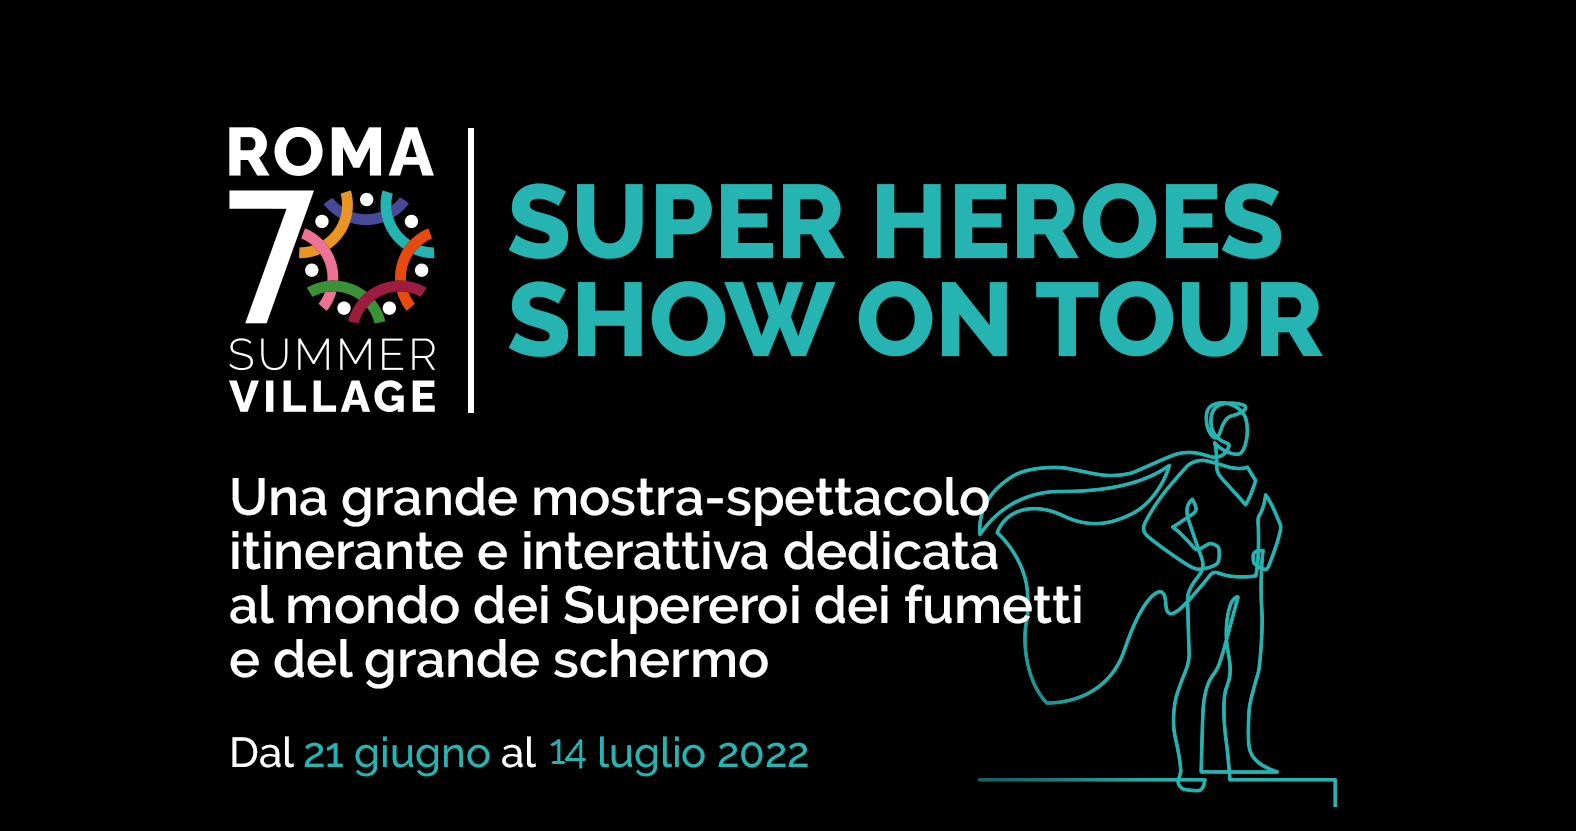 Super Heroes Show on tour @ Roma70 Summer Village